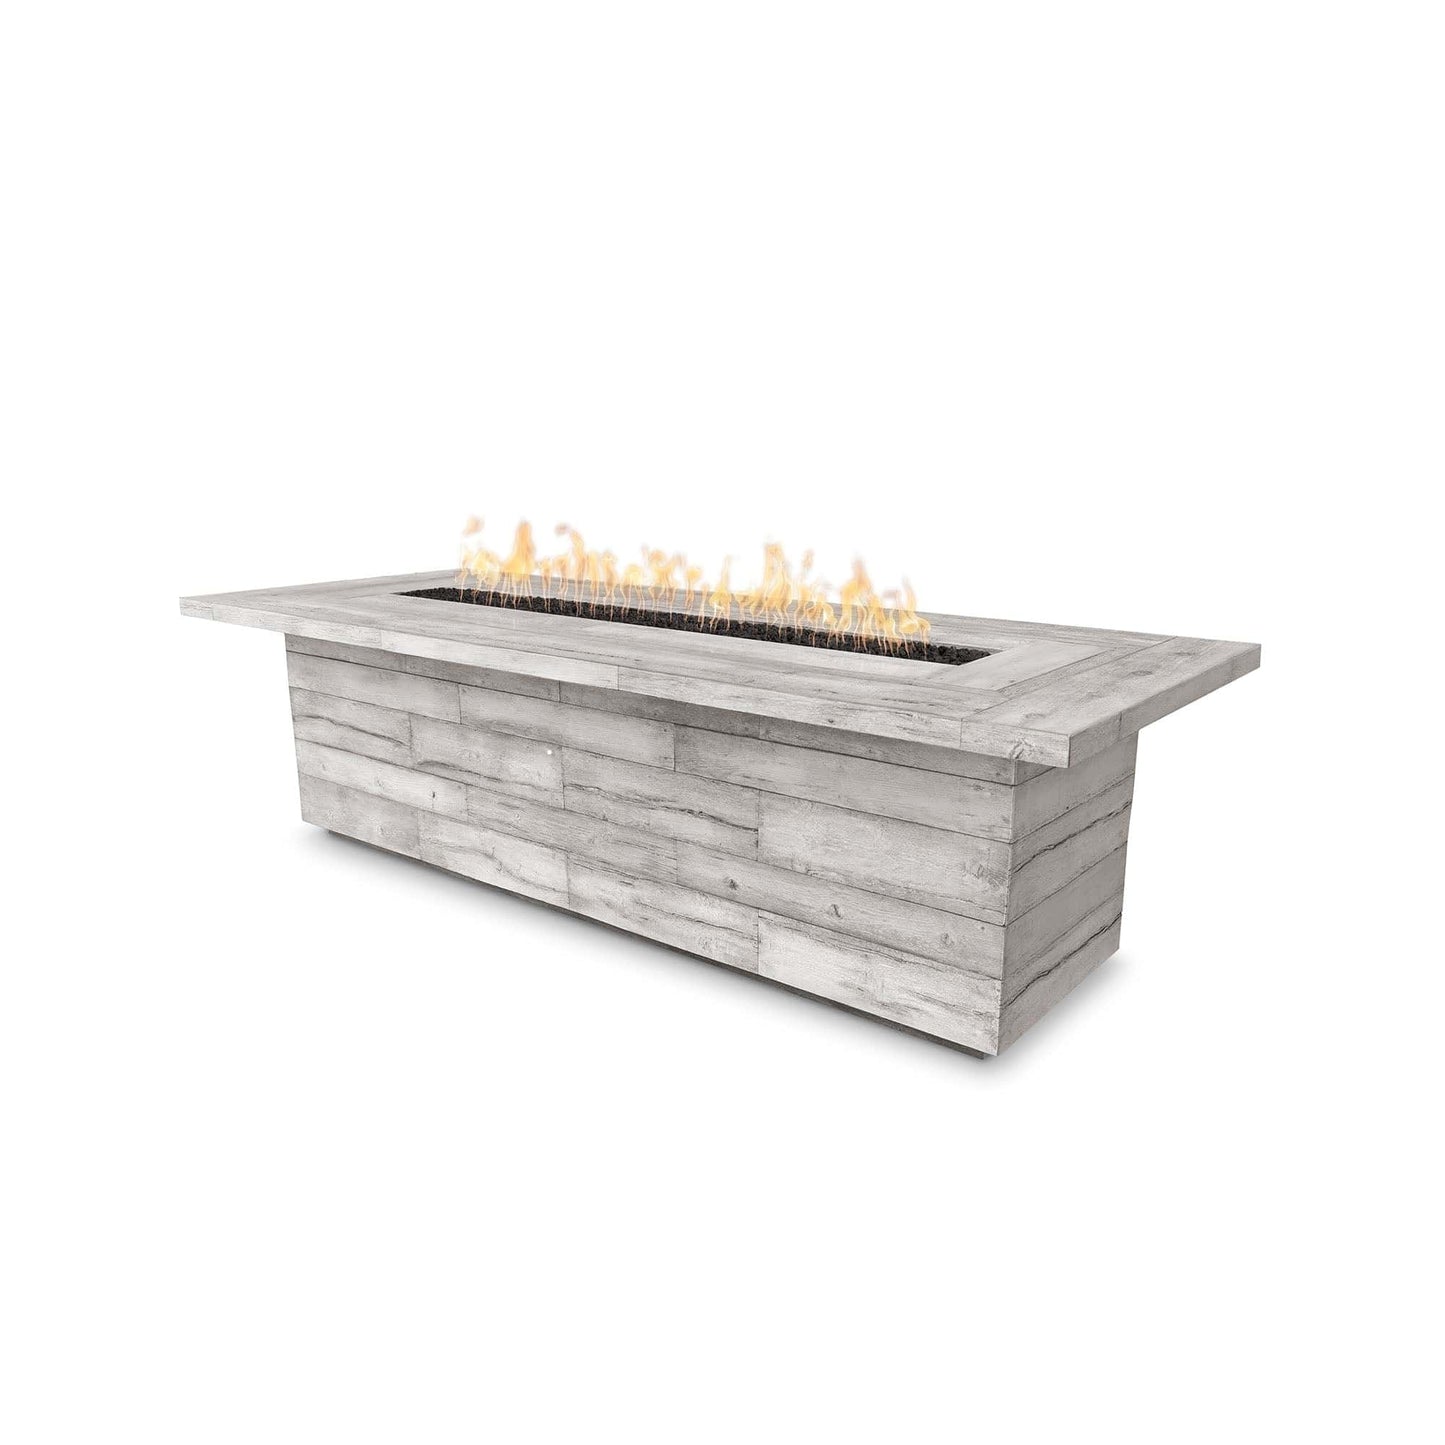 The Outdoor Plus Laguna 120” x 60” 12V Electronic Ignition Wood Grain Fire Pit OPT-LGNGF120E12V